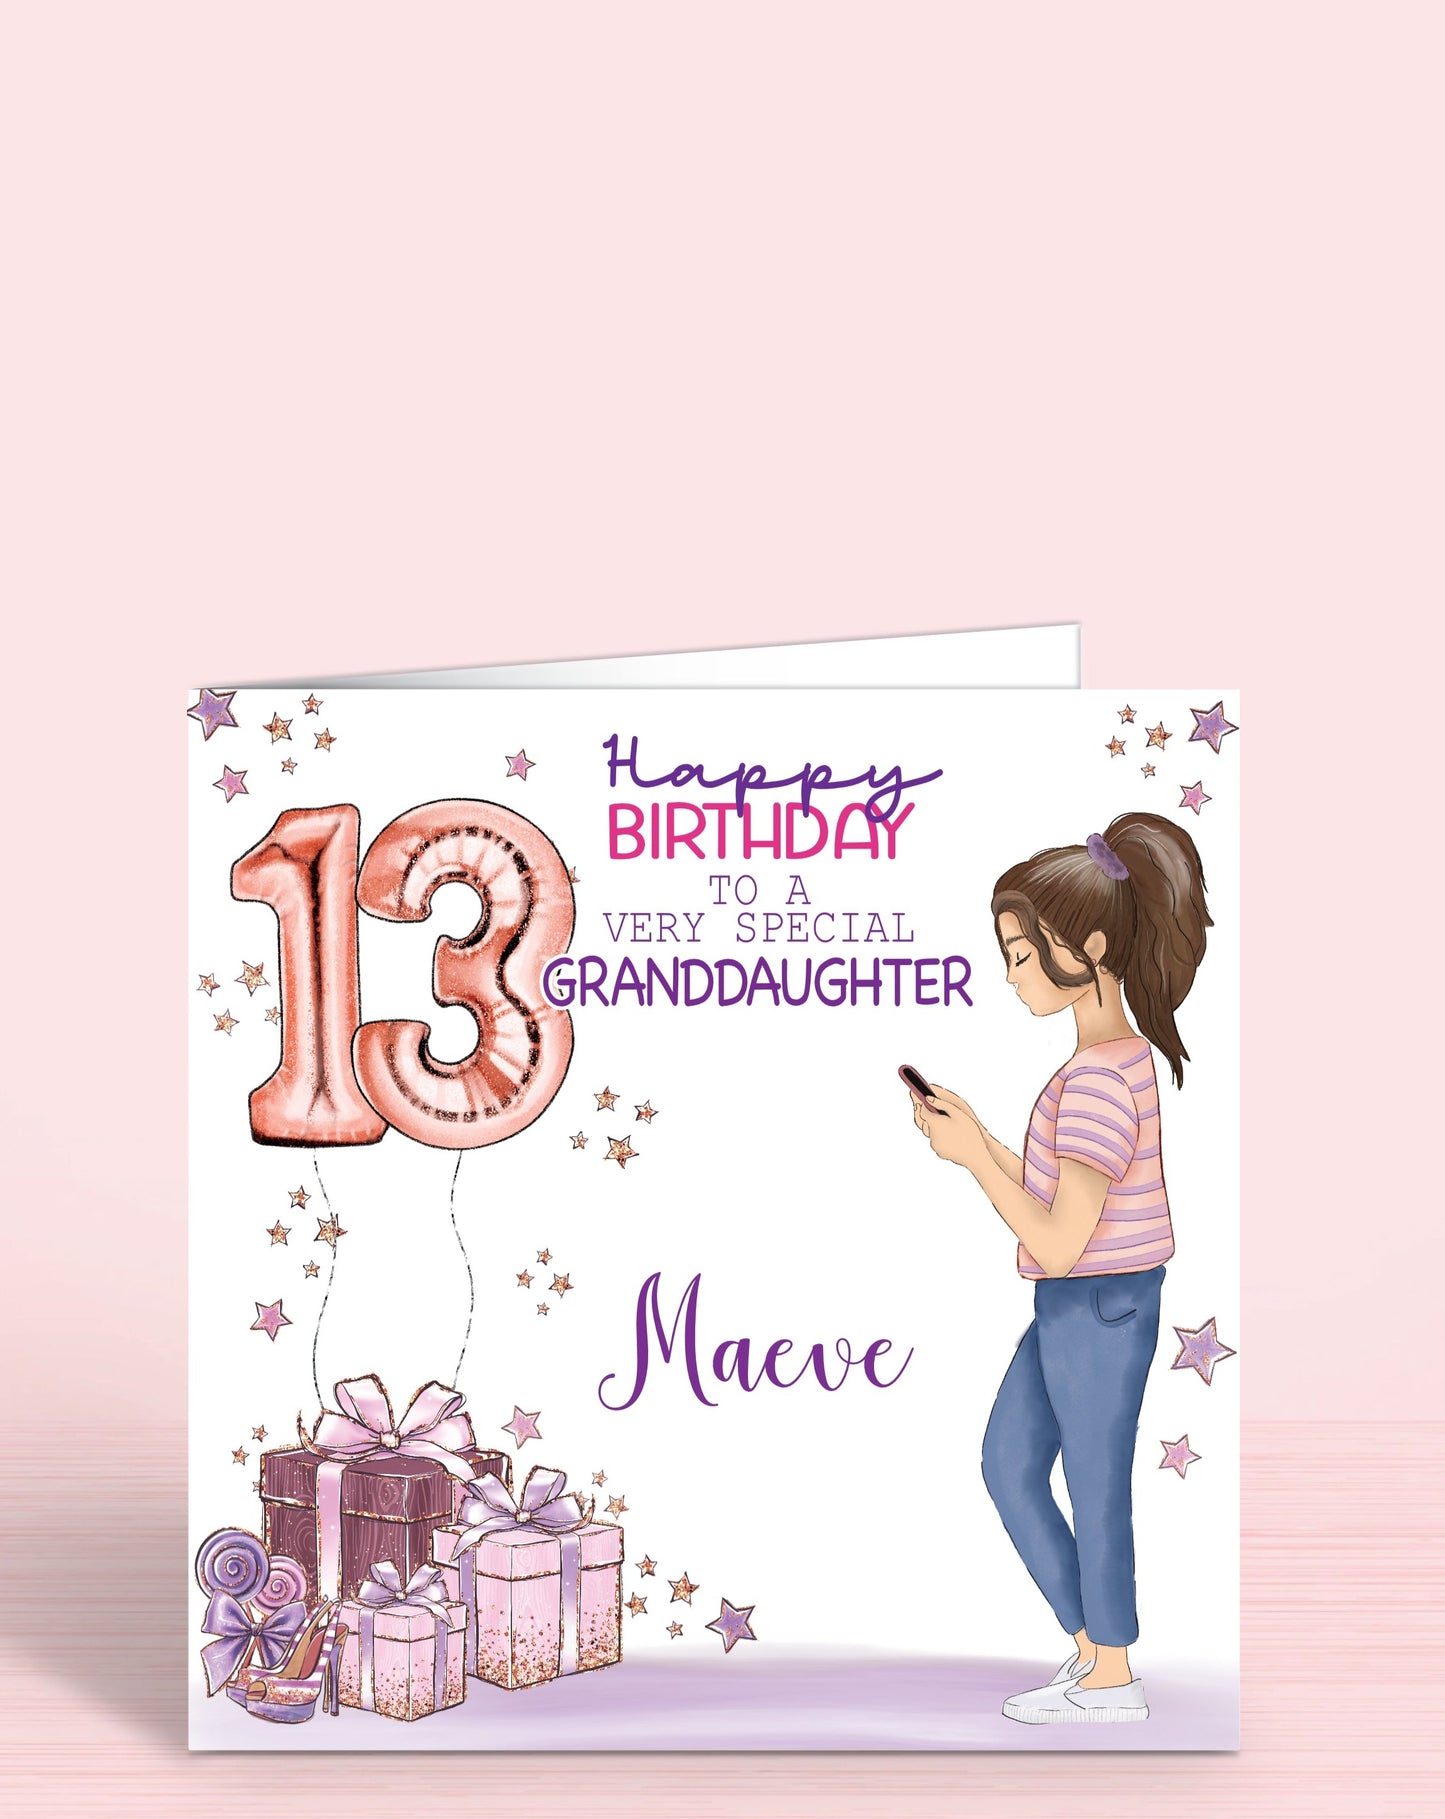 13th birthday card, BROWN HAIR, teenager birthday card,  pink and purple card for someone special, daughter, granddaughter, niece, cousin, sister